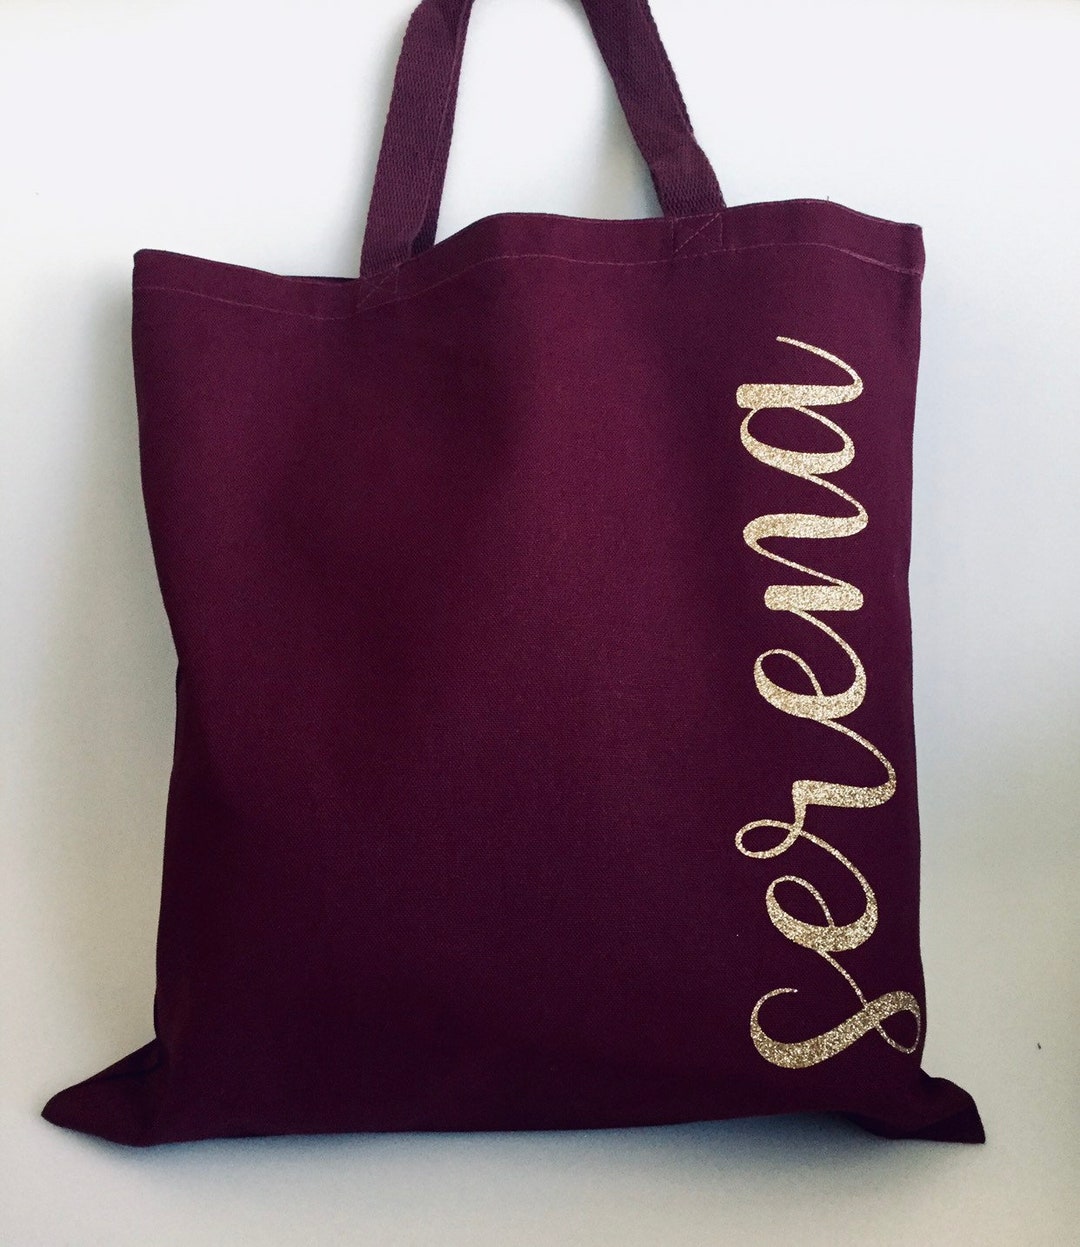 Tribal Name Personalized Large Canvas Tote Bag